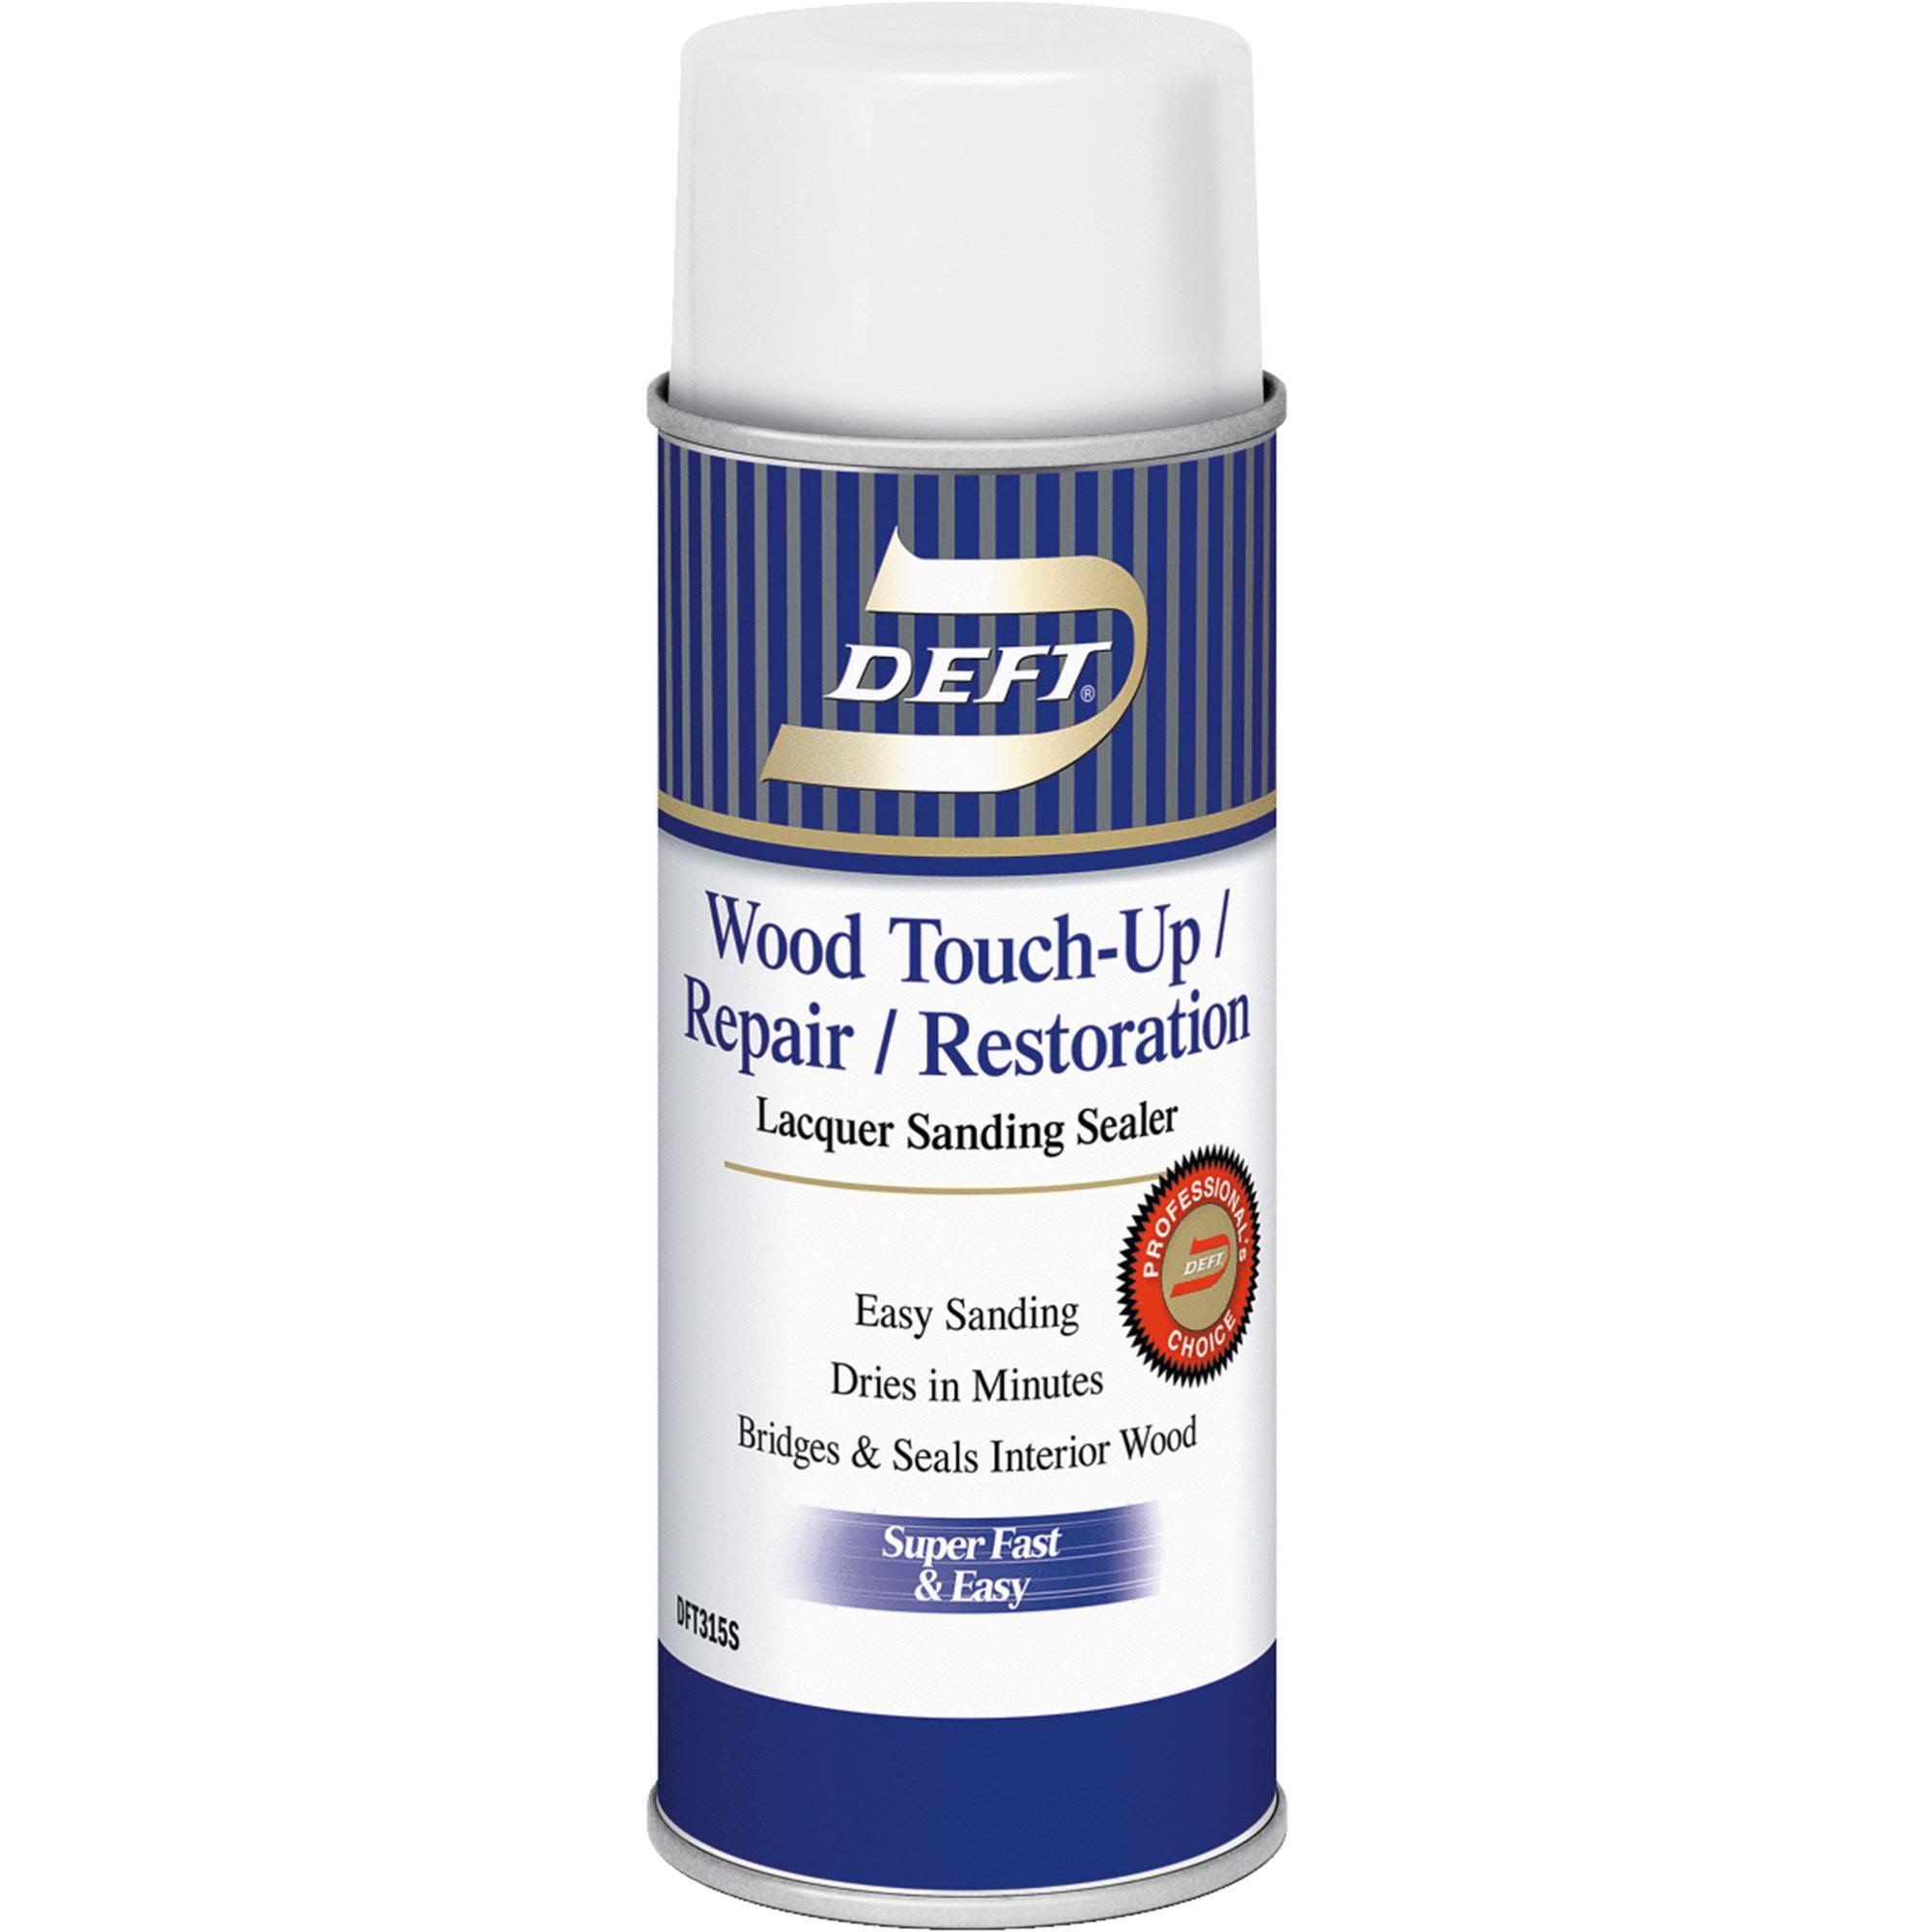 Deft/ppg Architectural Fin Dft315s/54 Clear Wood Touch Up and Repair | General | Delivery guaranteed | Best Price Guarantee